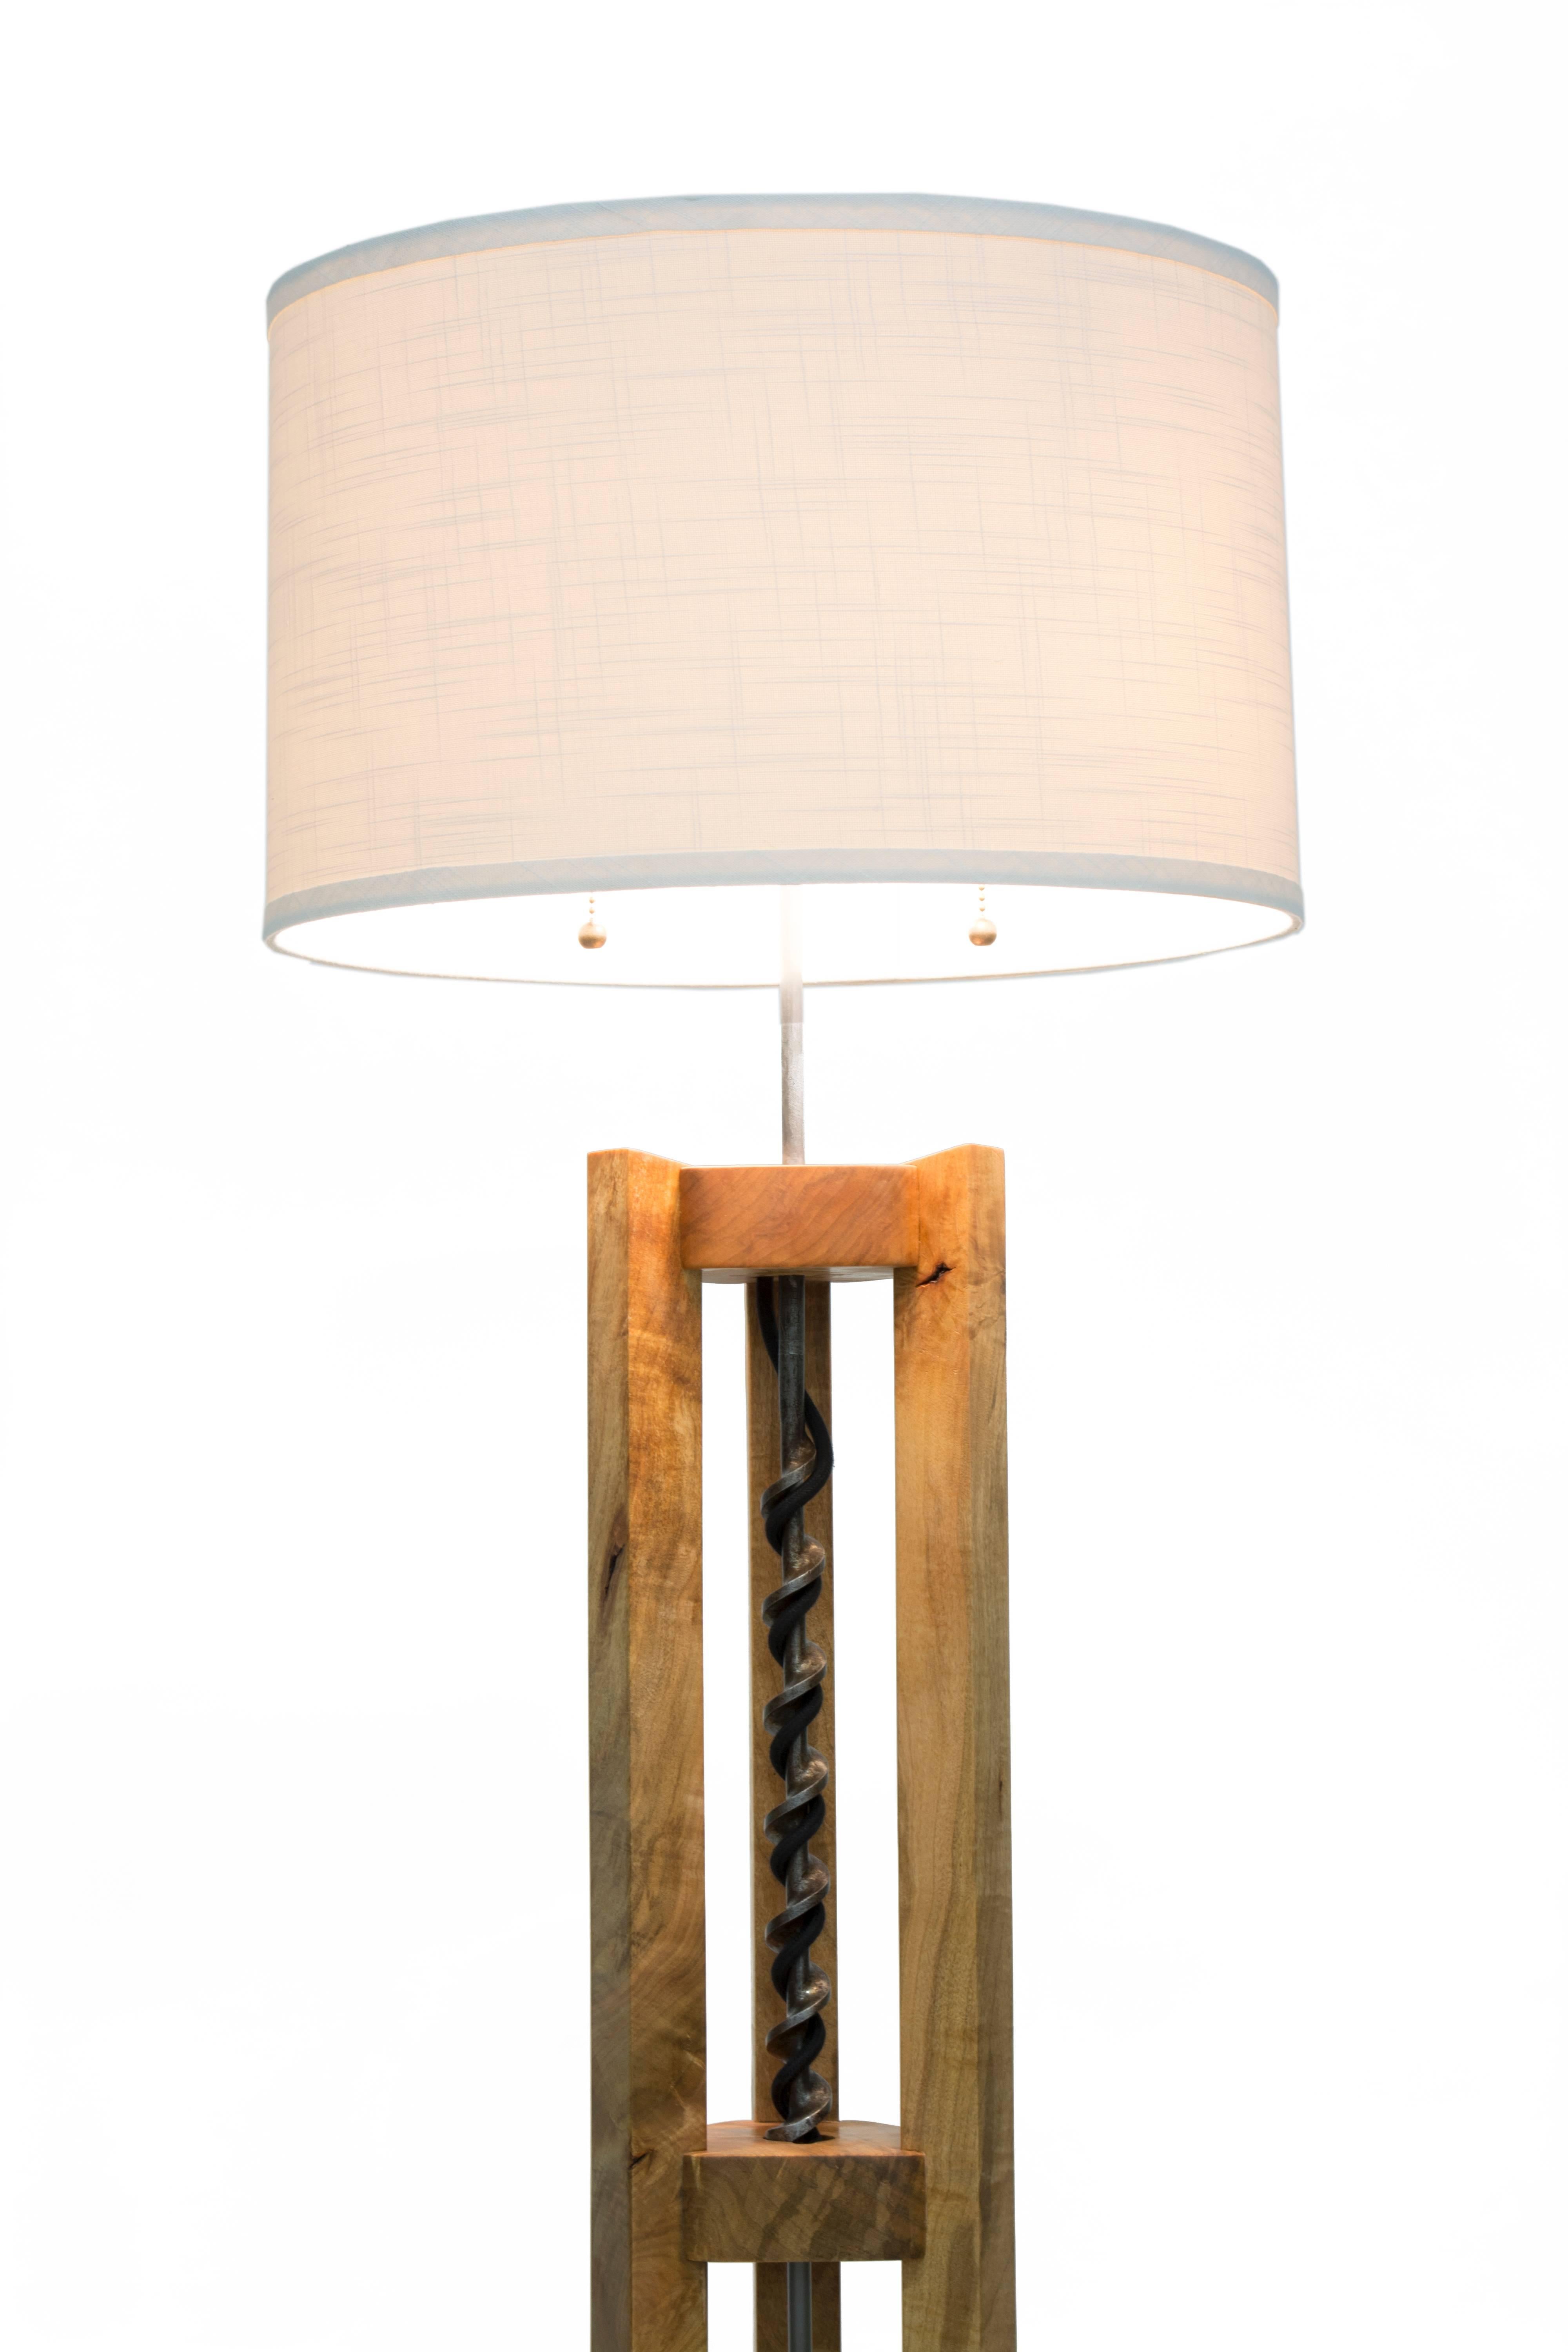 Steel Bits Floor Lamp : ambrosia maple, antique drill bit, handmade to order For Sale